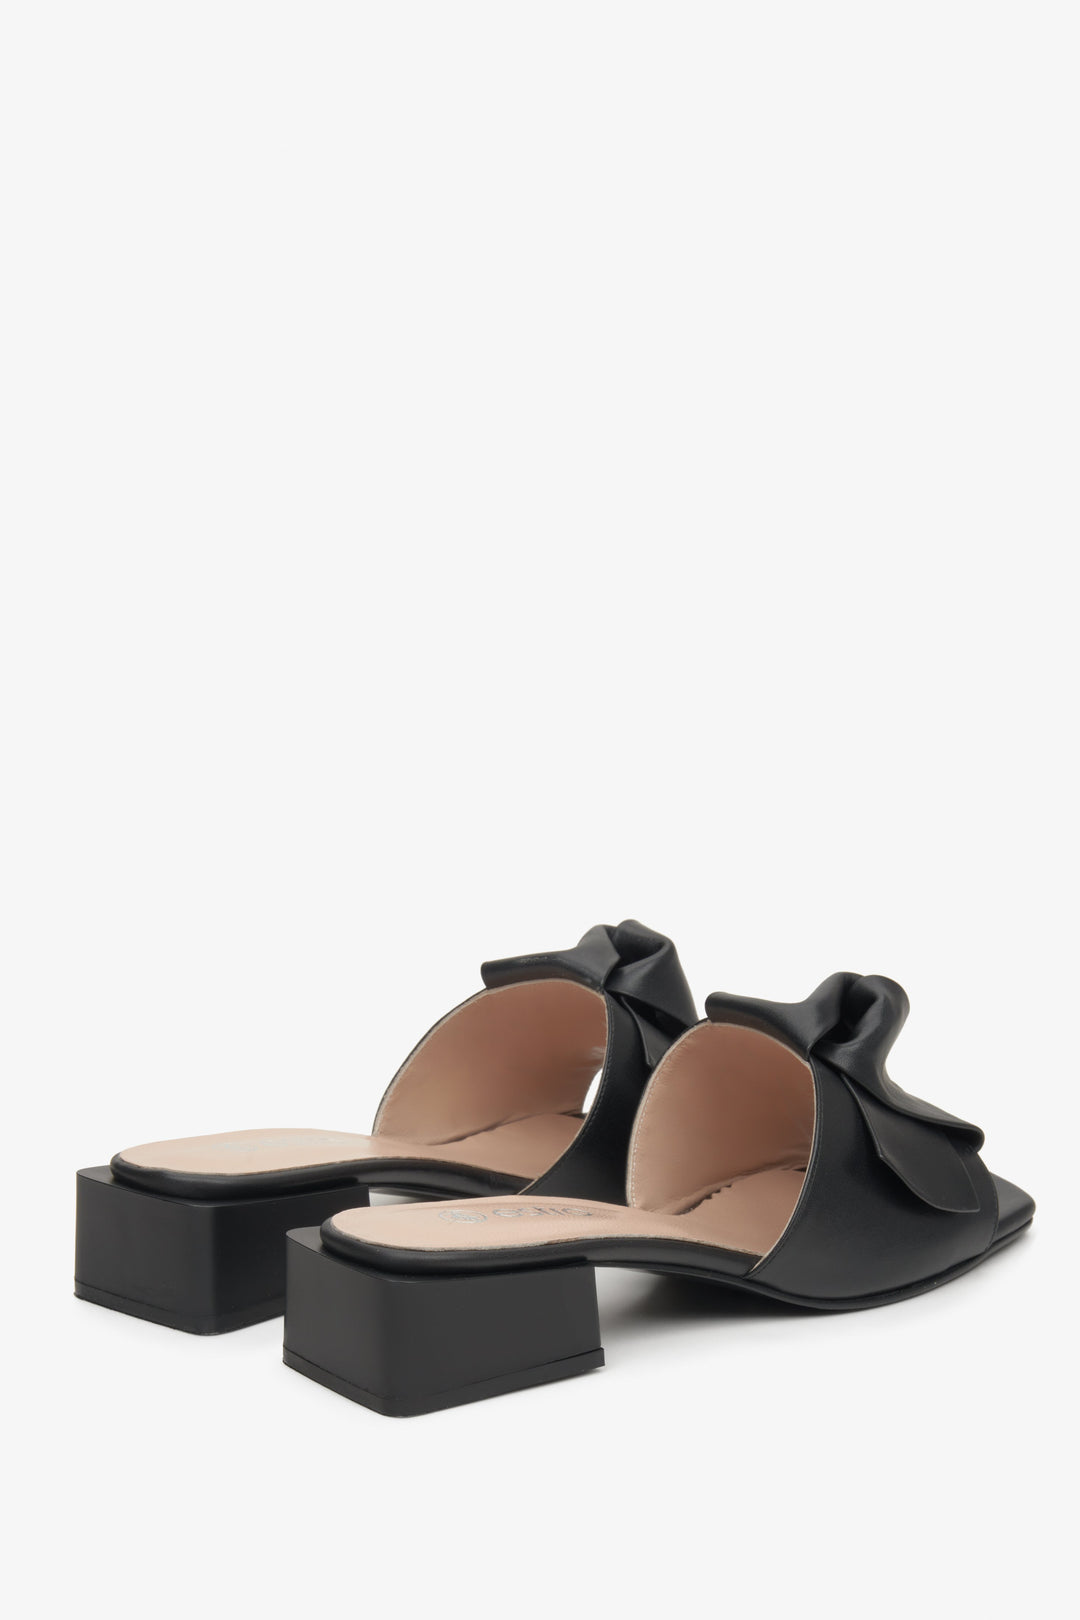 Women's black leather mules with a low heel - presentation of the heel and side profile of the shoes.